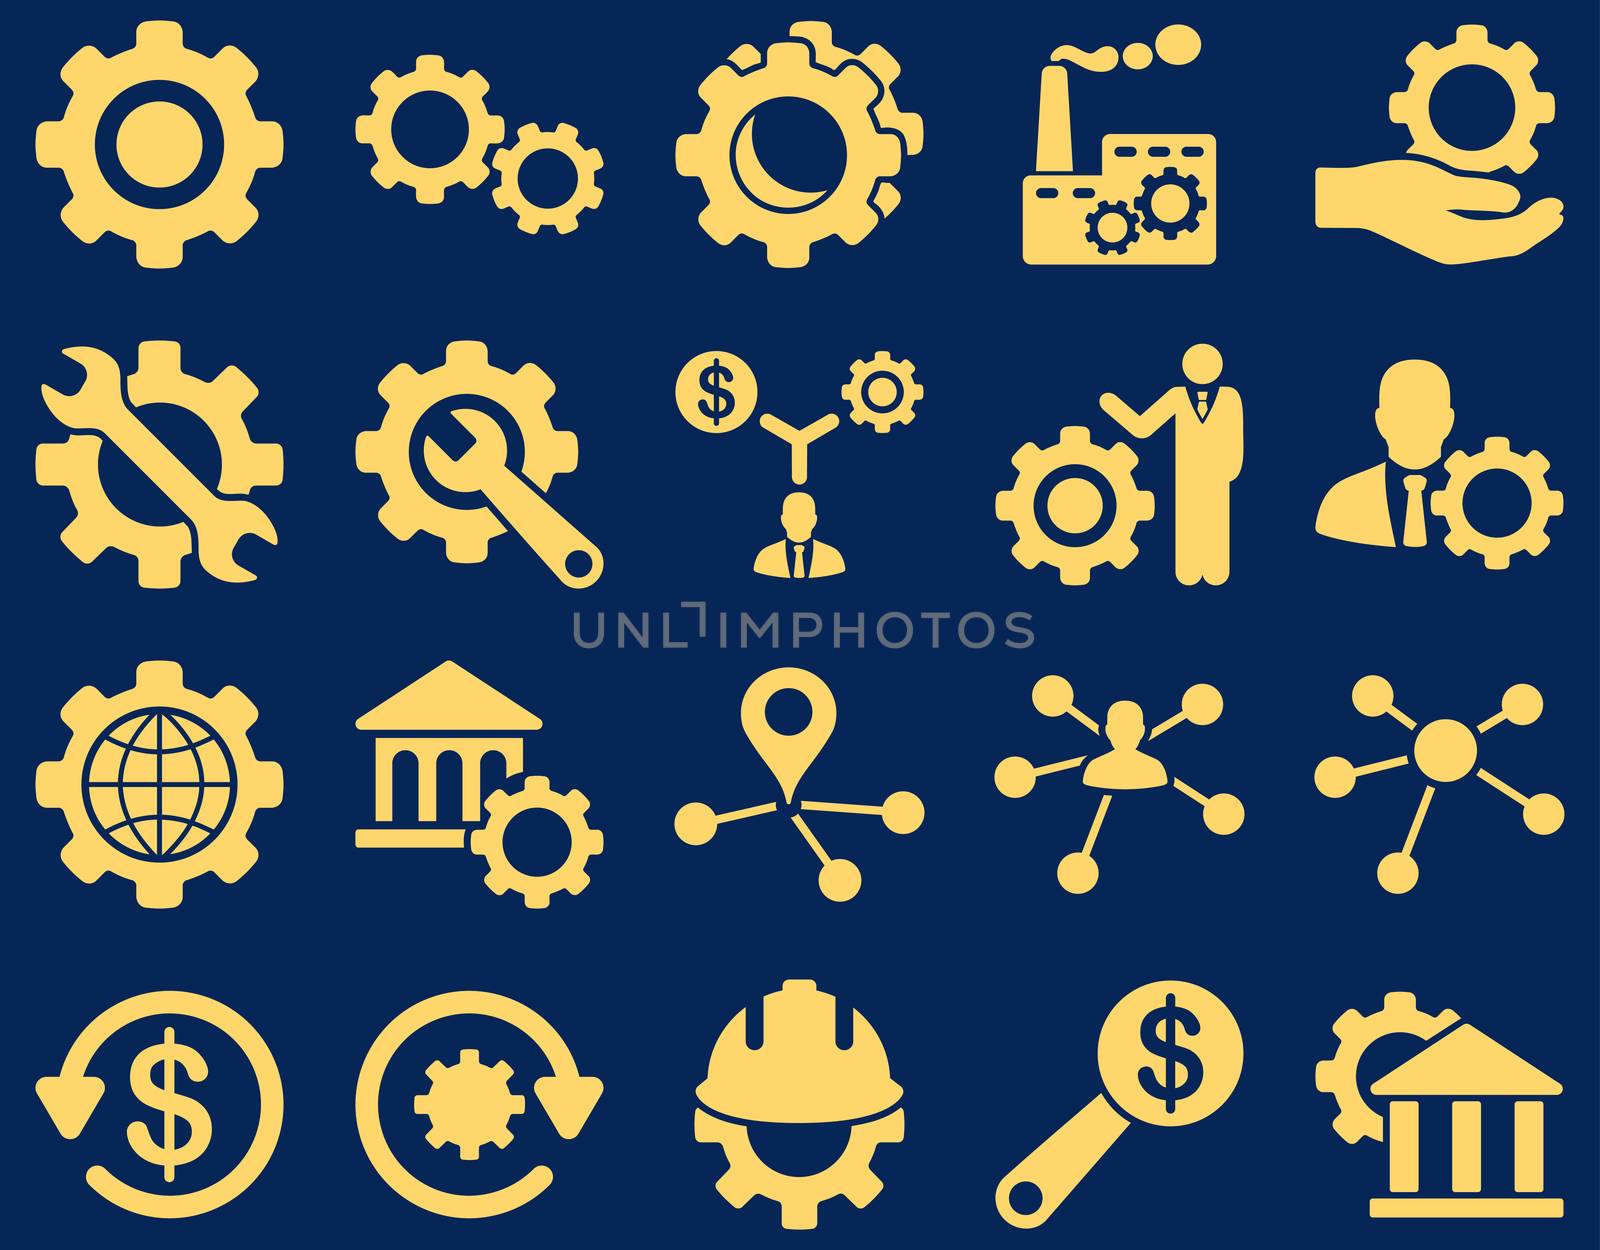 Settings and Tools Icons. Glyph set style is flat images, yellow color, isolated on a blue background.